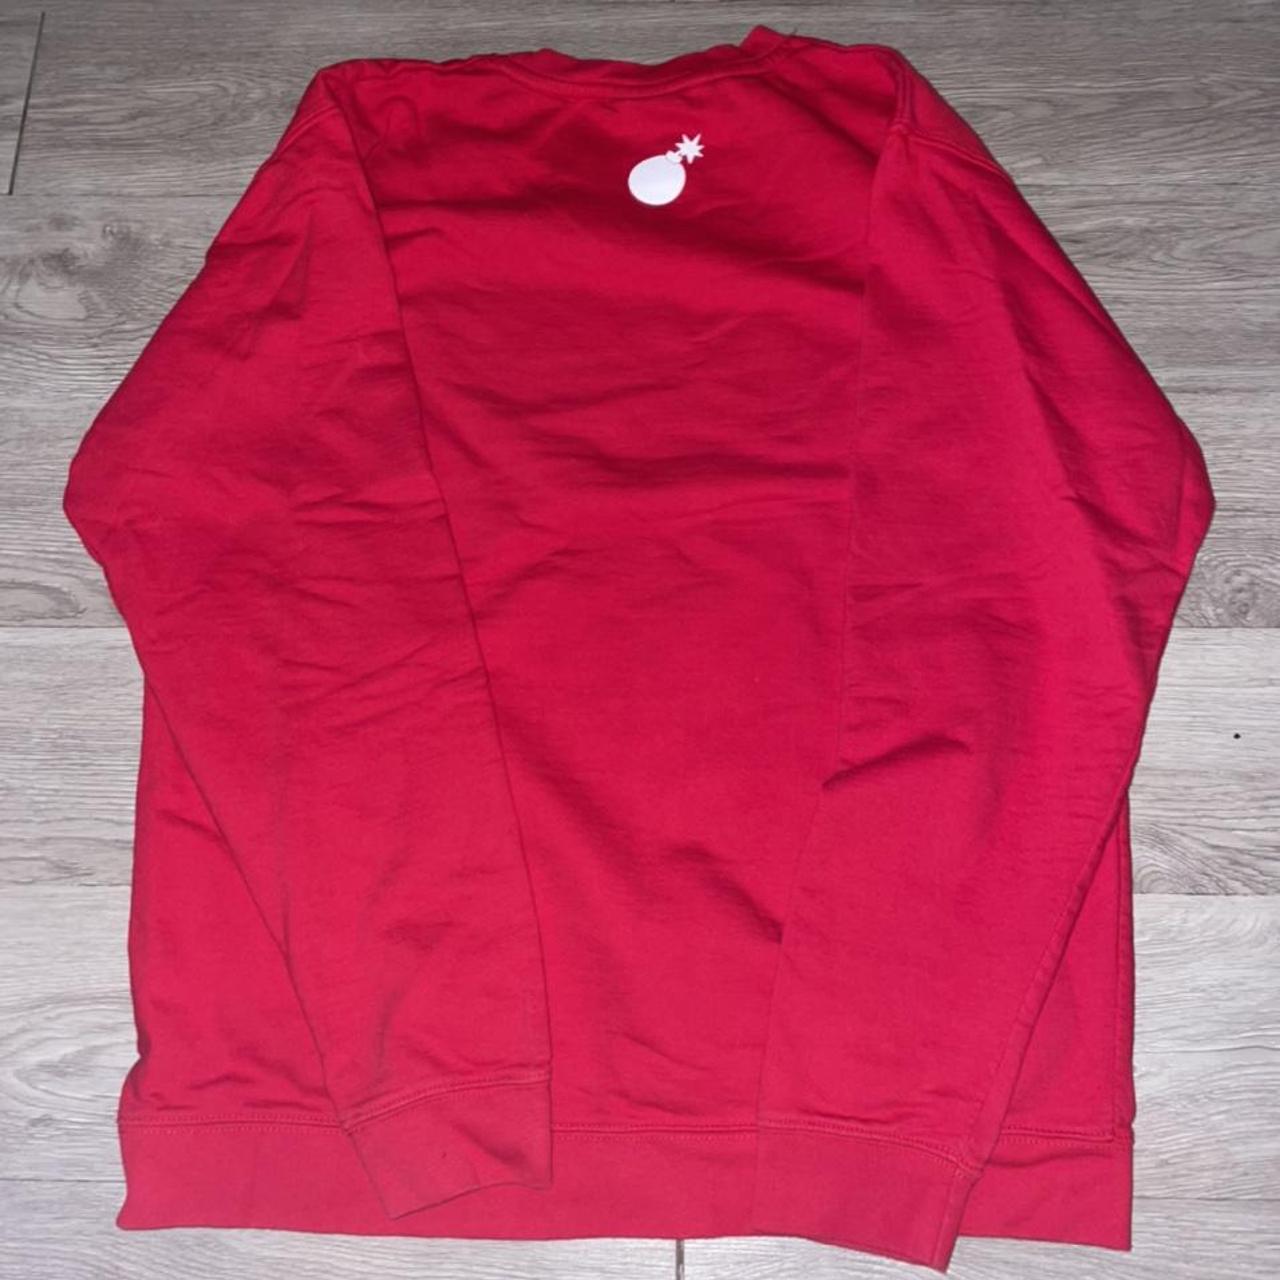 The Hundreds Men's Red and White Sweatshirt (2)